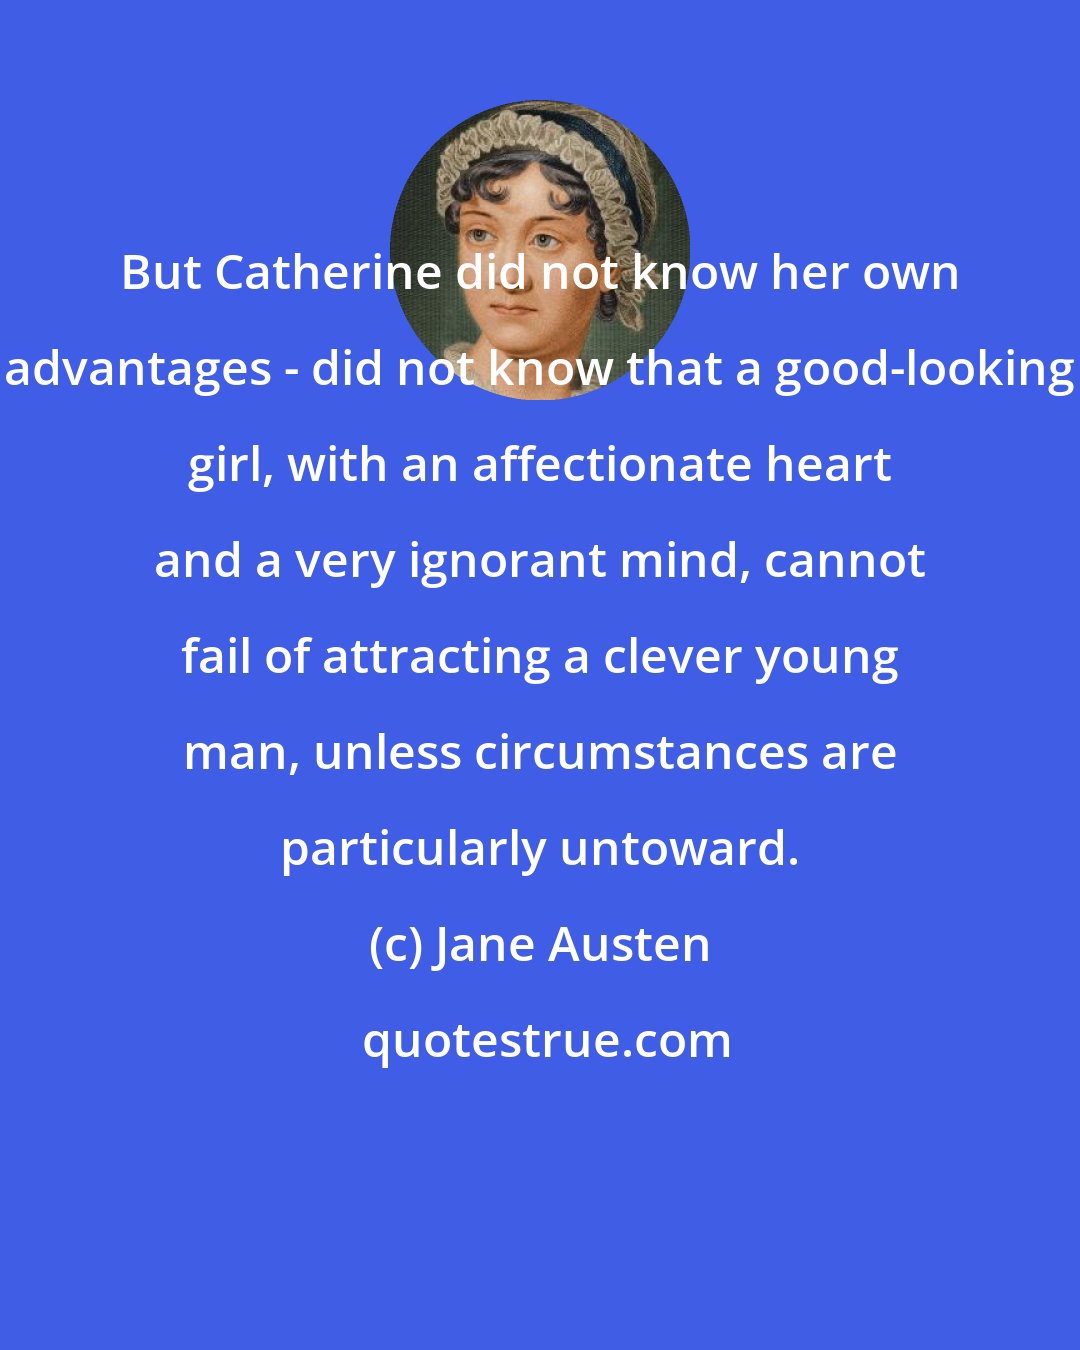 Jane Austen: But Catherine did not know her own advantages - did not know that a good-looking girl, with an affectionate heart and a very ignorant mind, cannot fail of attracting a clever young man, unless circumstances are particularly untoward.